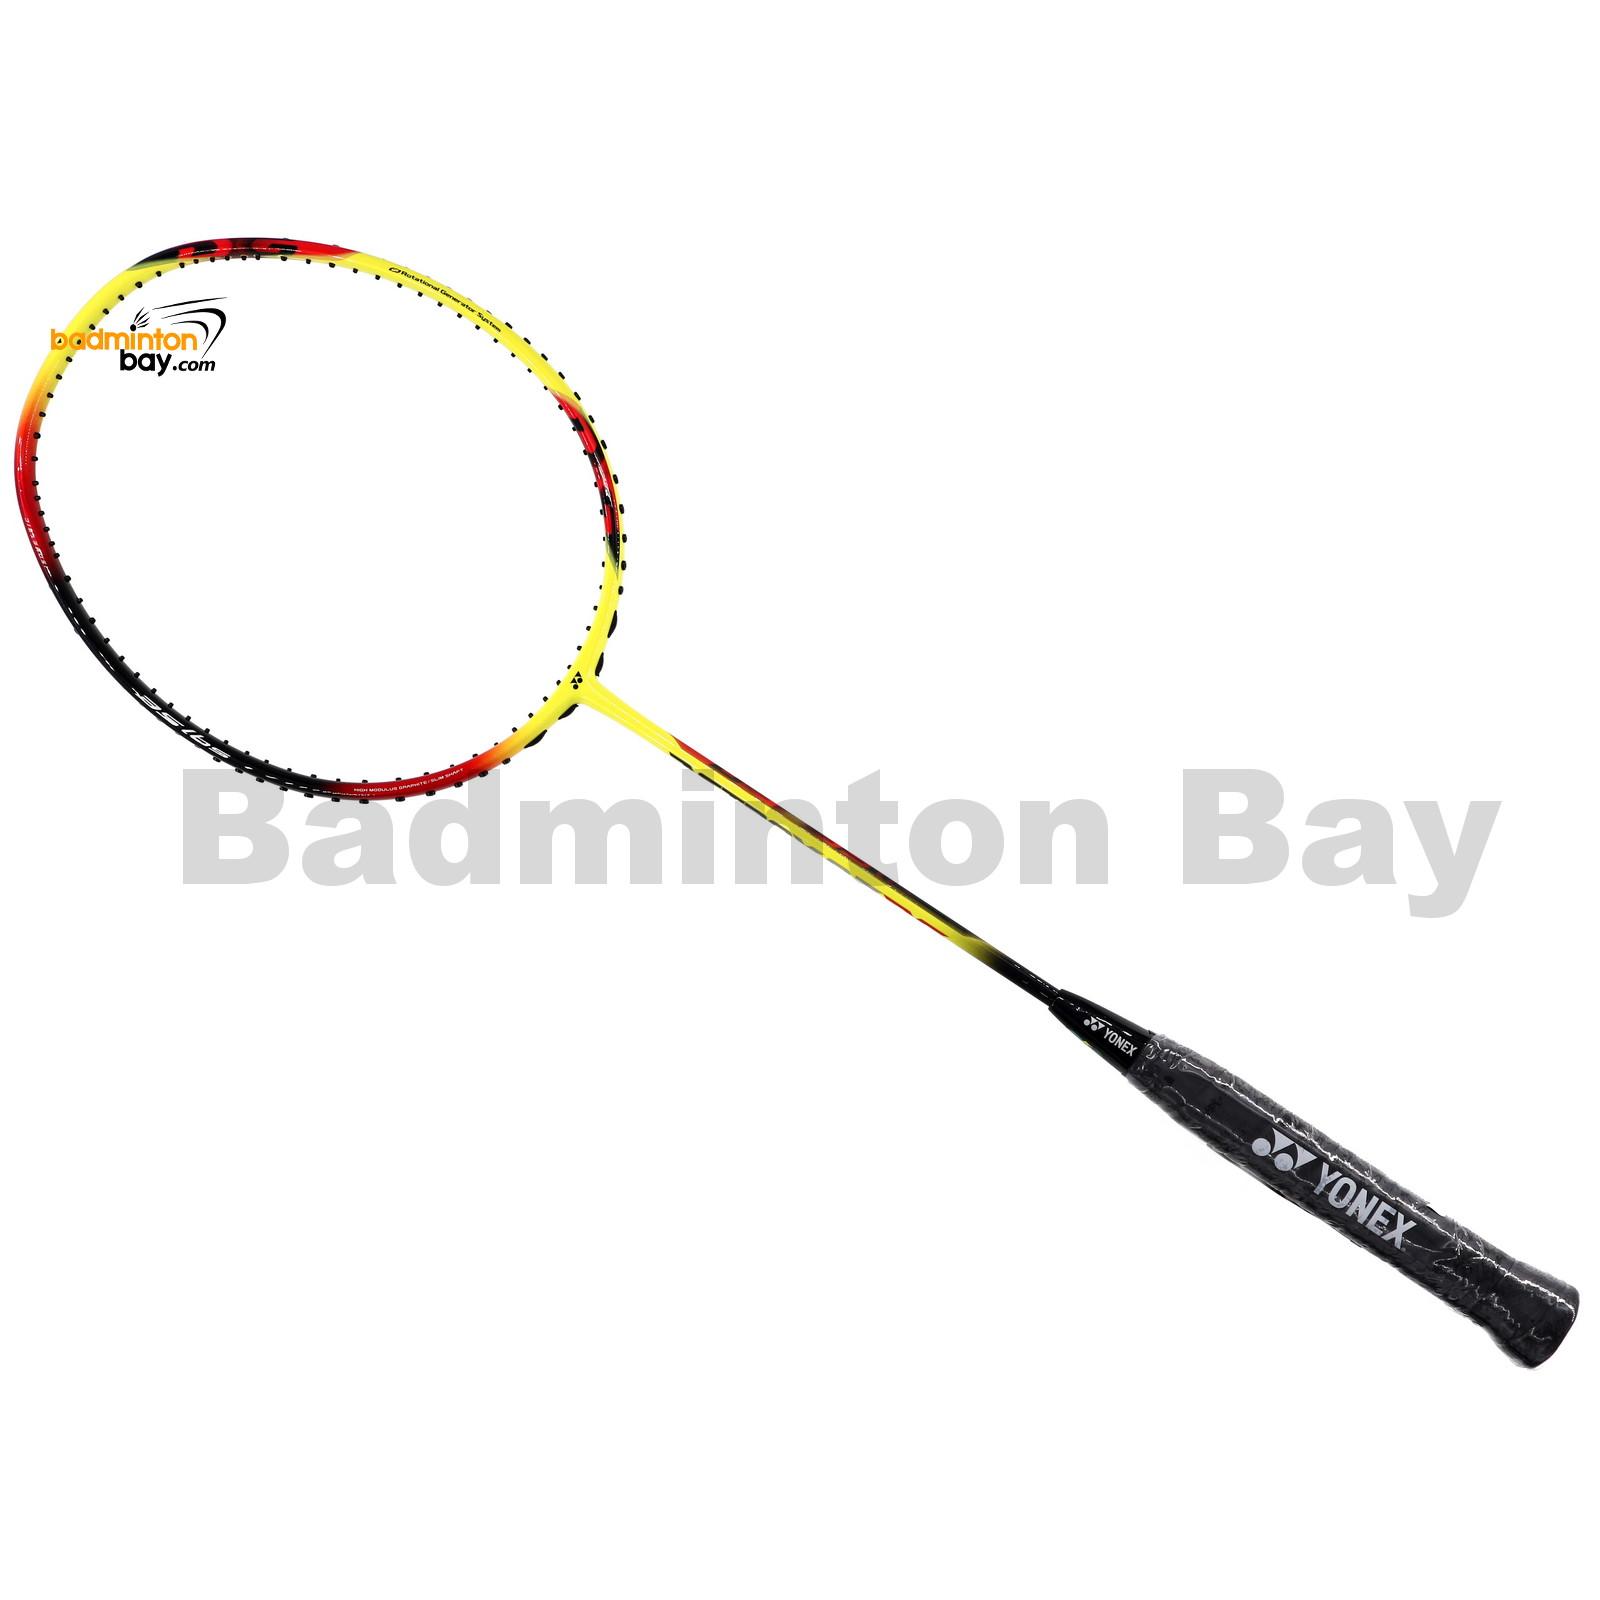 The Complete Guide to Yonex Badminton Rackets: Astrox Series 